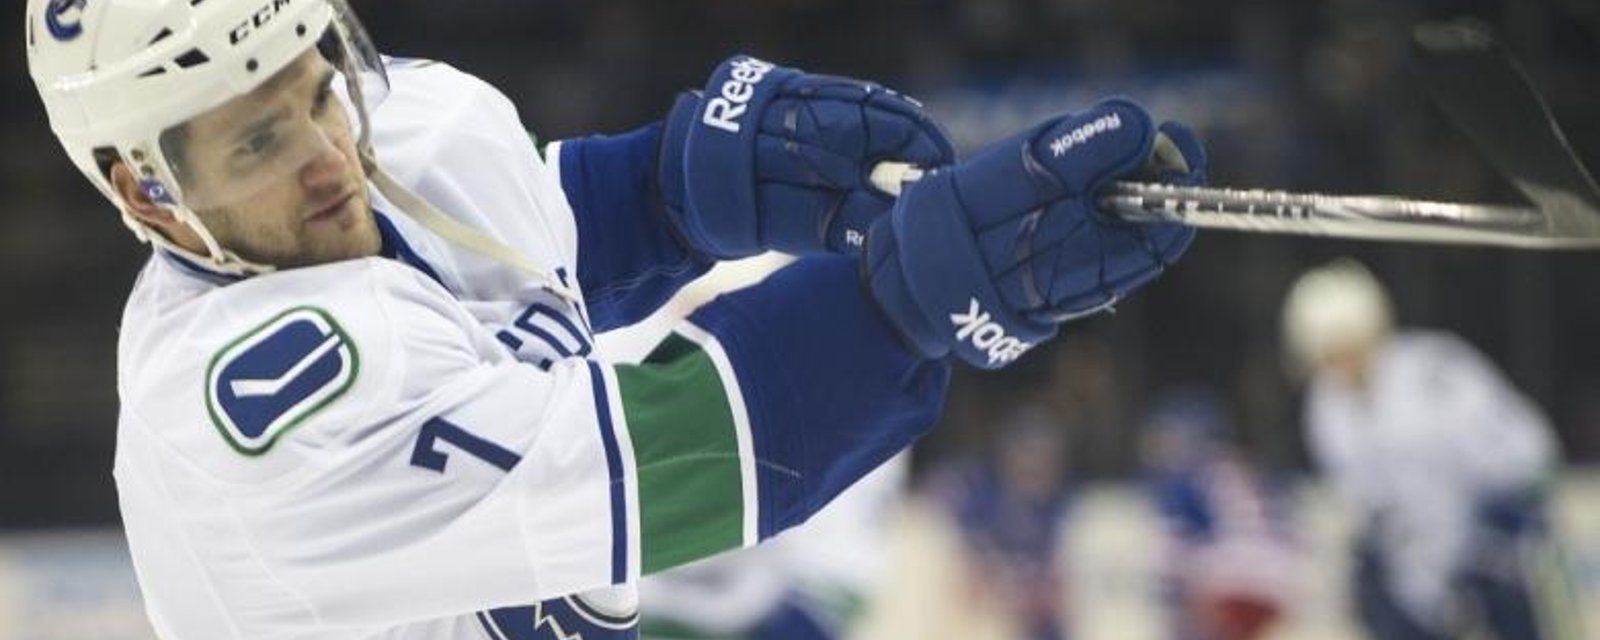 Breaking: Flames sign troubled Canucks forward to short-term deal.